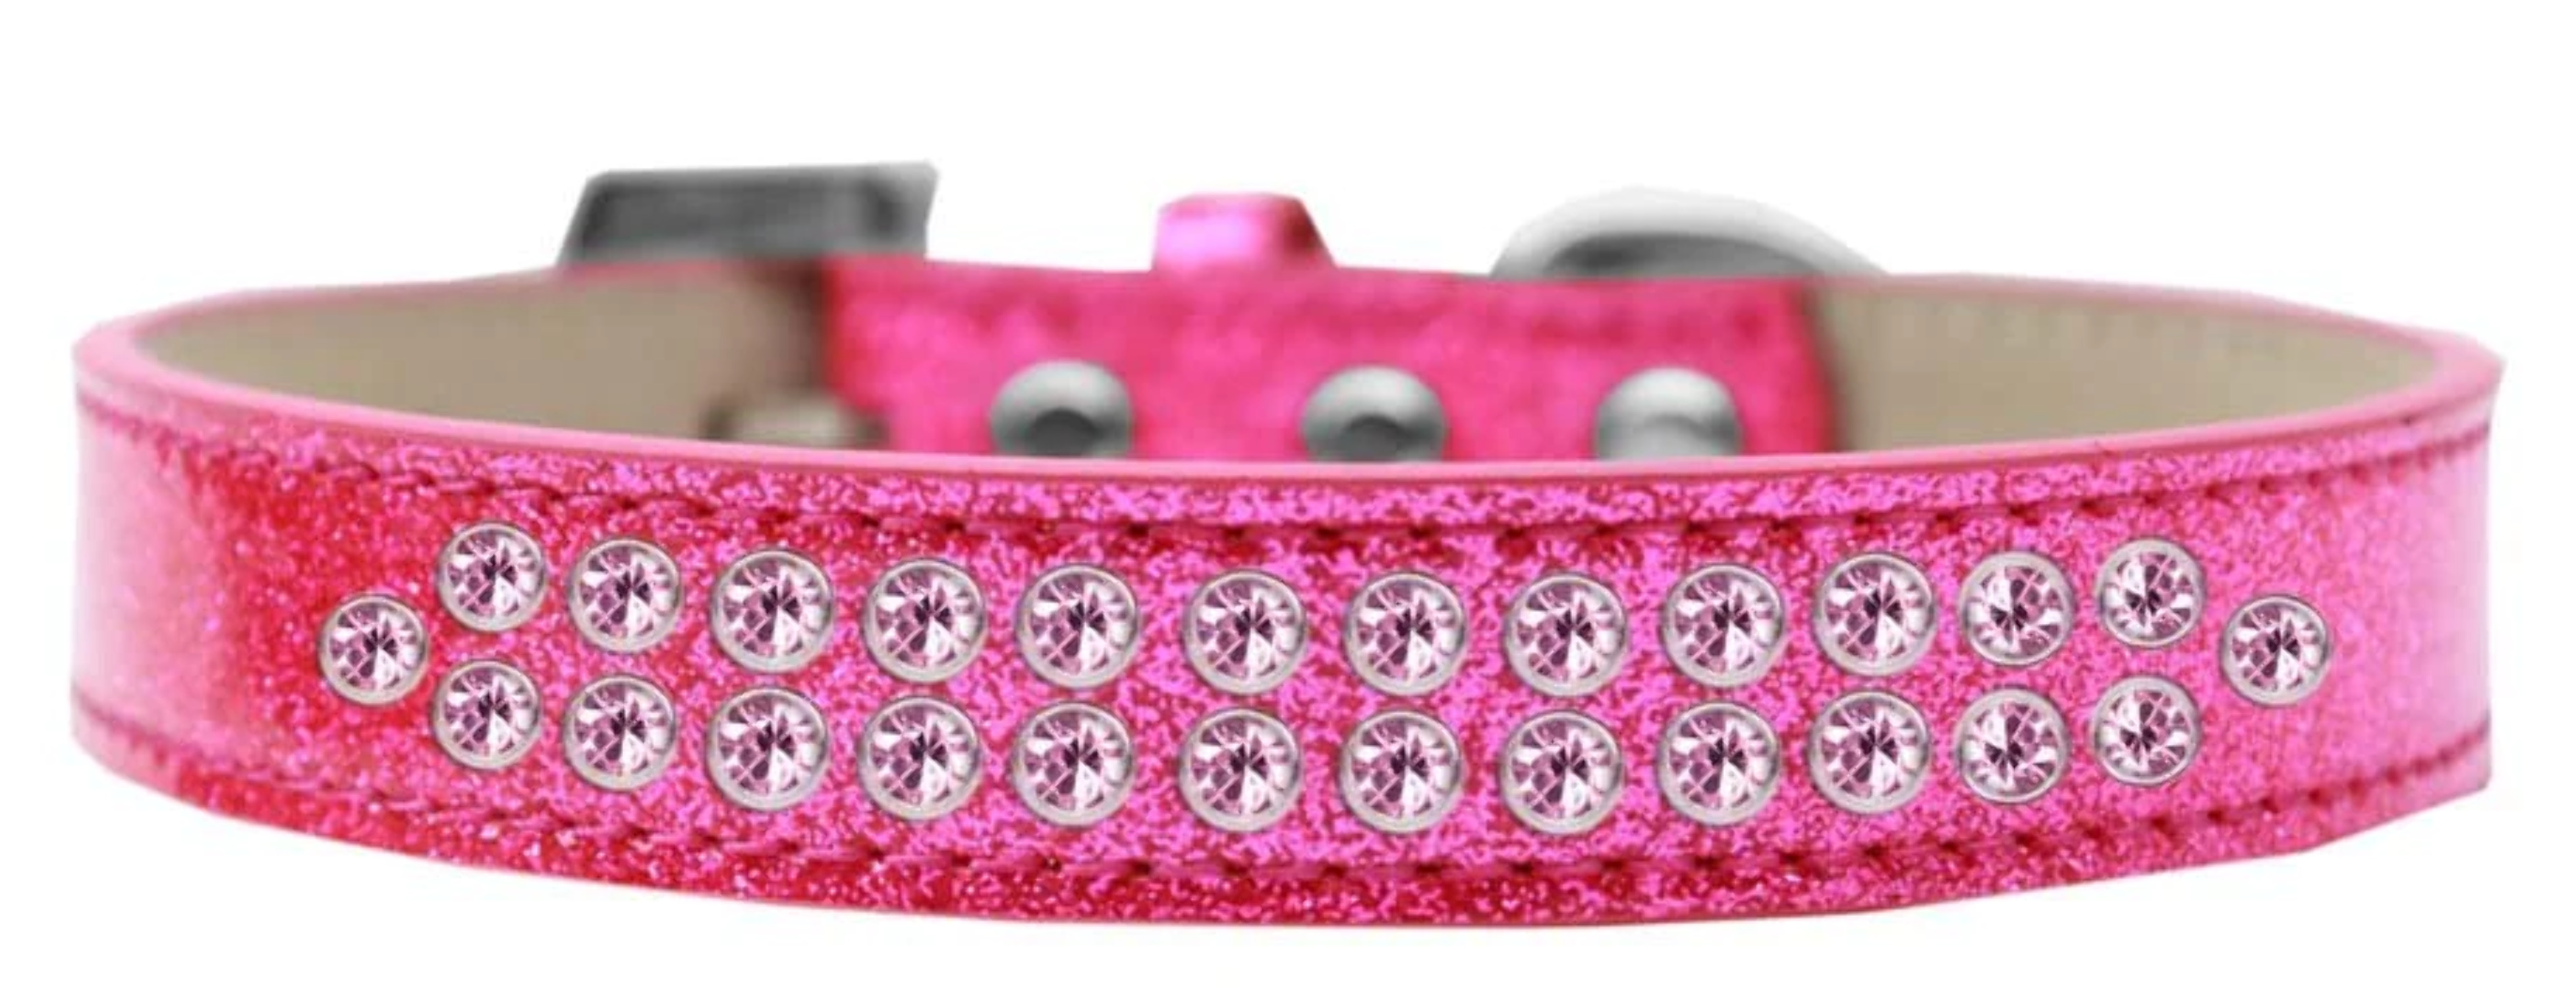 Mirage Pet Products614-06 BK-12 Two Row Light Pink Crystal Dog Collar, Black Ice Cream - Size 12 - image 4 of 5